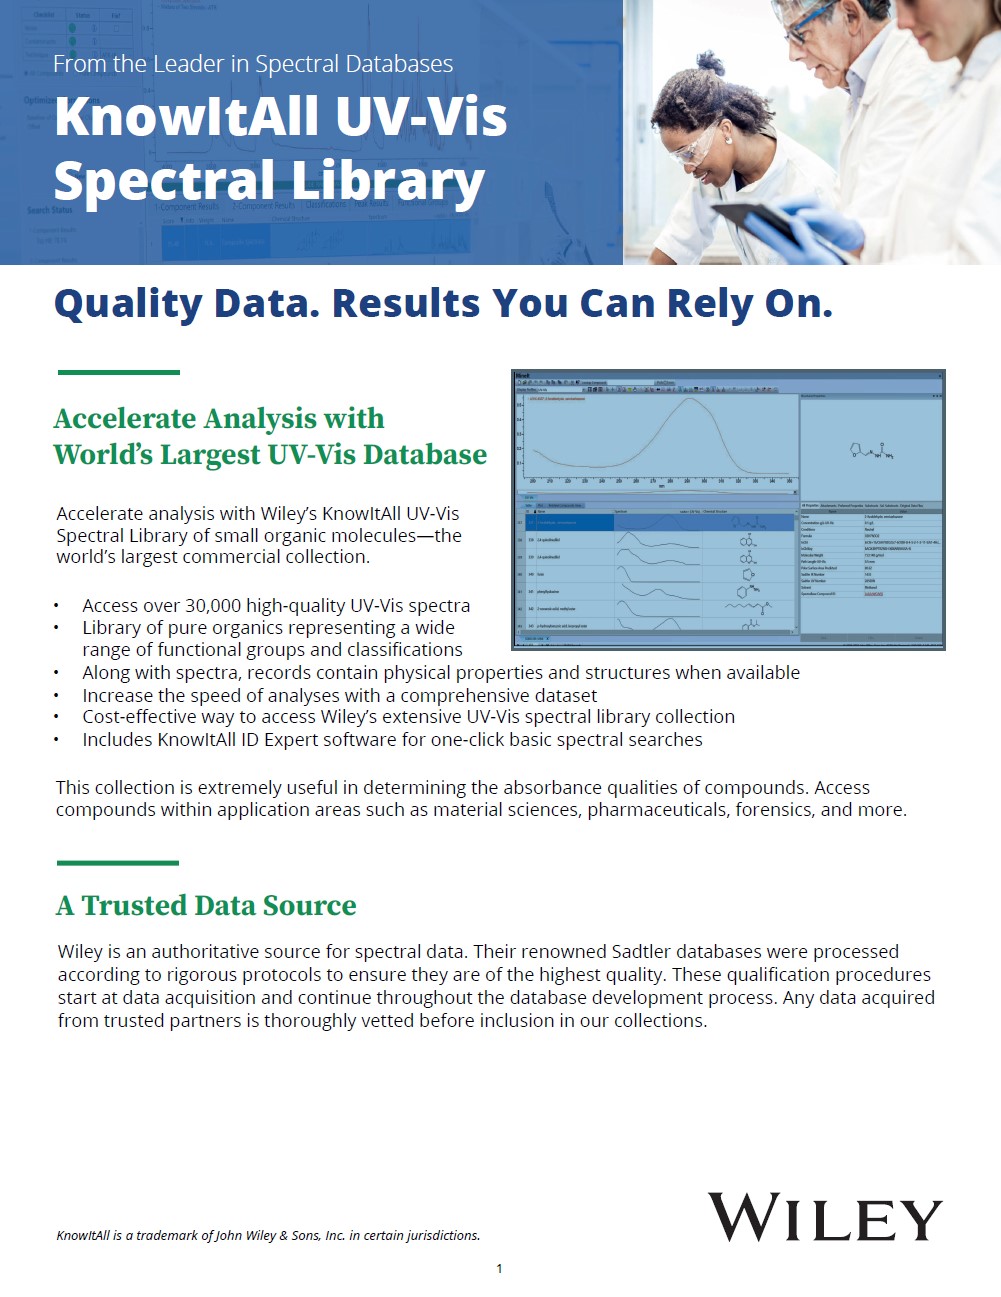 Wiley KnowItAll UV-Vis Spectral Database Collection